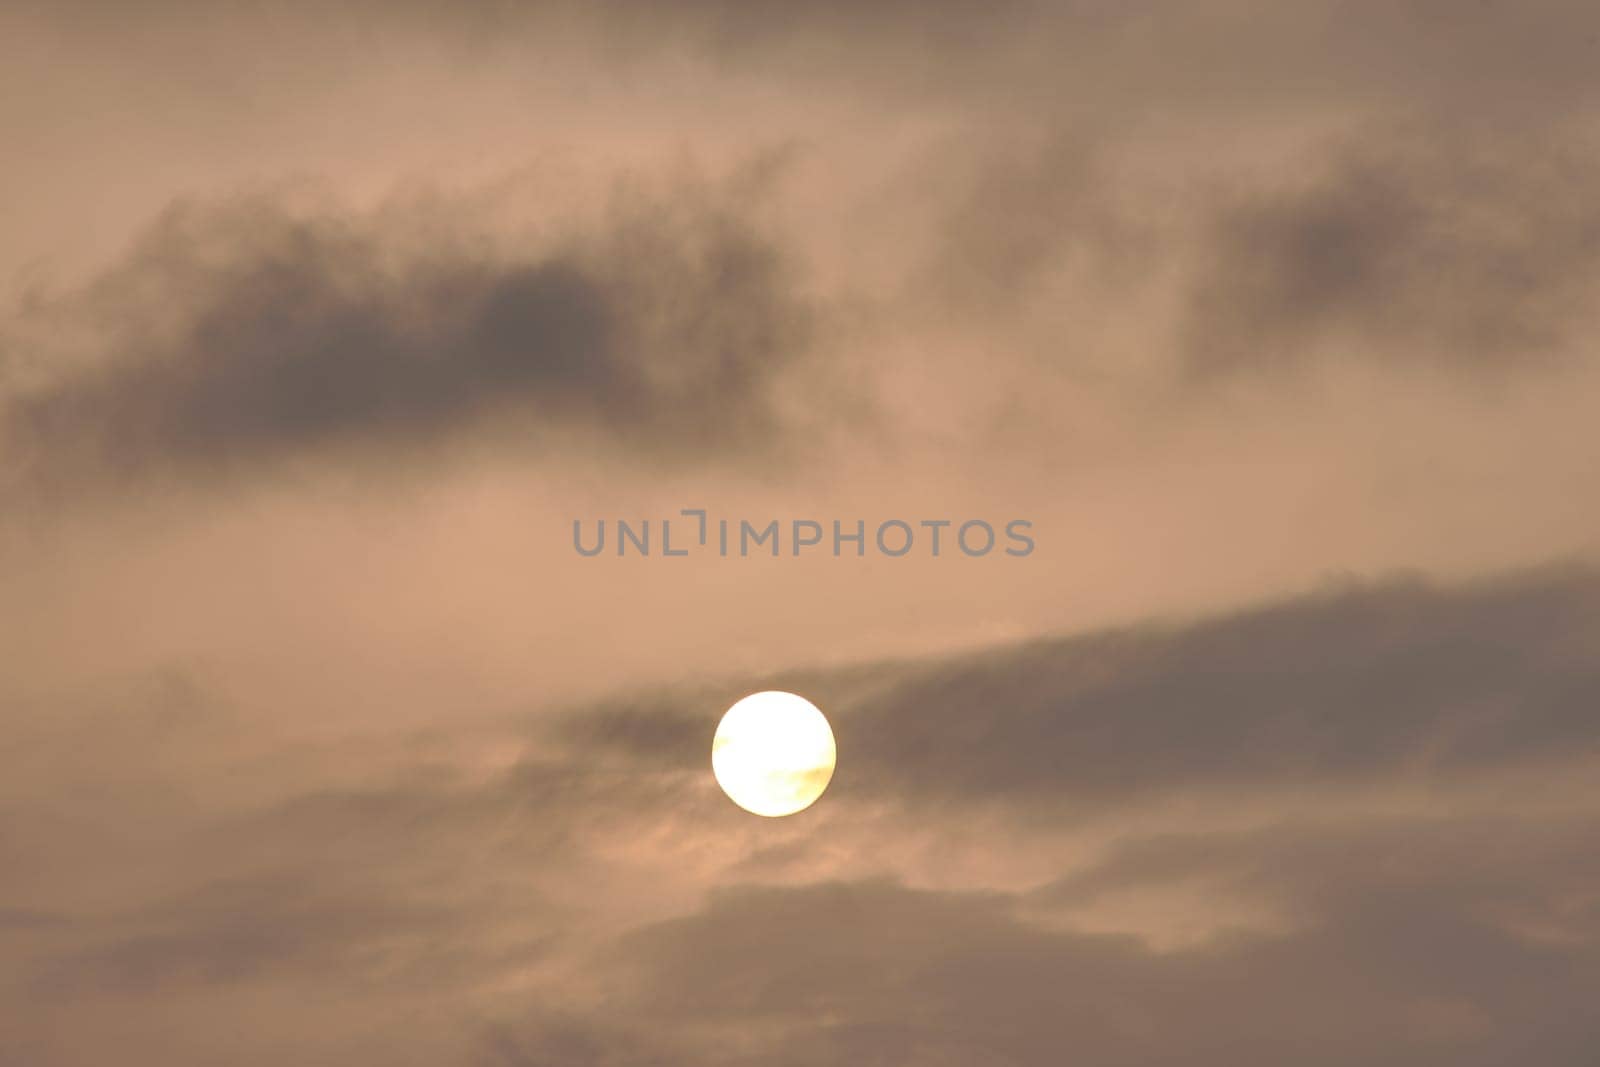 Sky, with diffused sun clouds colourful. Dramatic orange sky with a softly obscured sun, surrounded by clouds